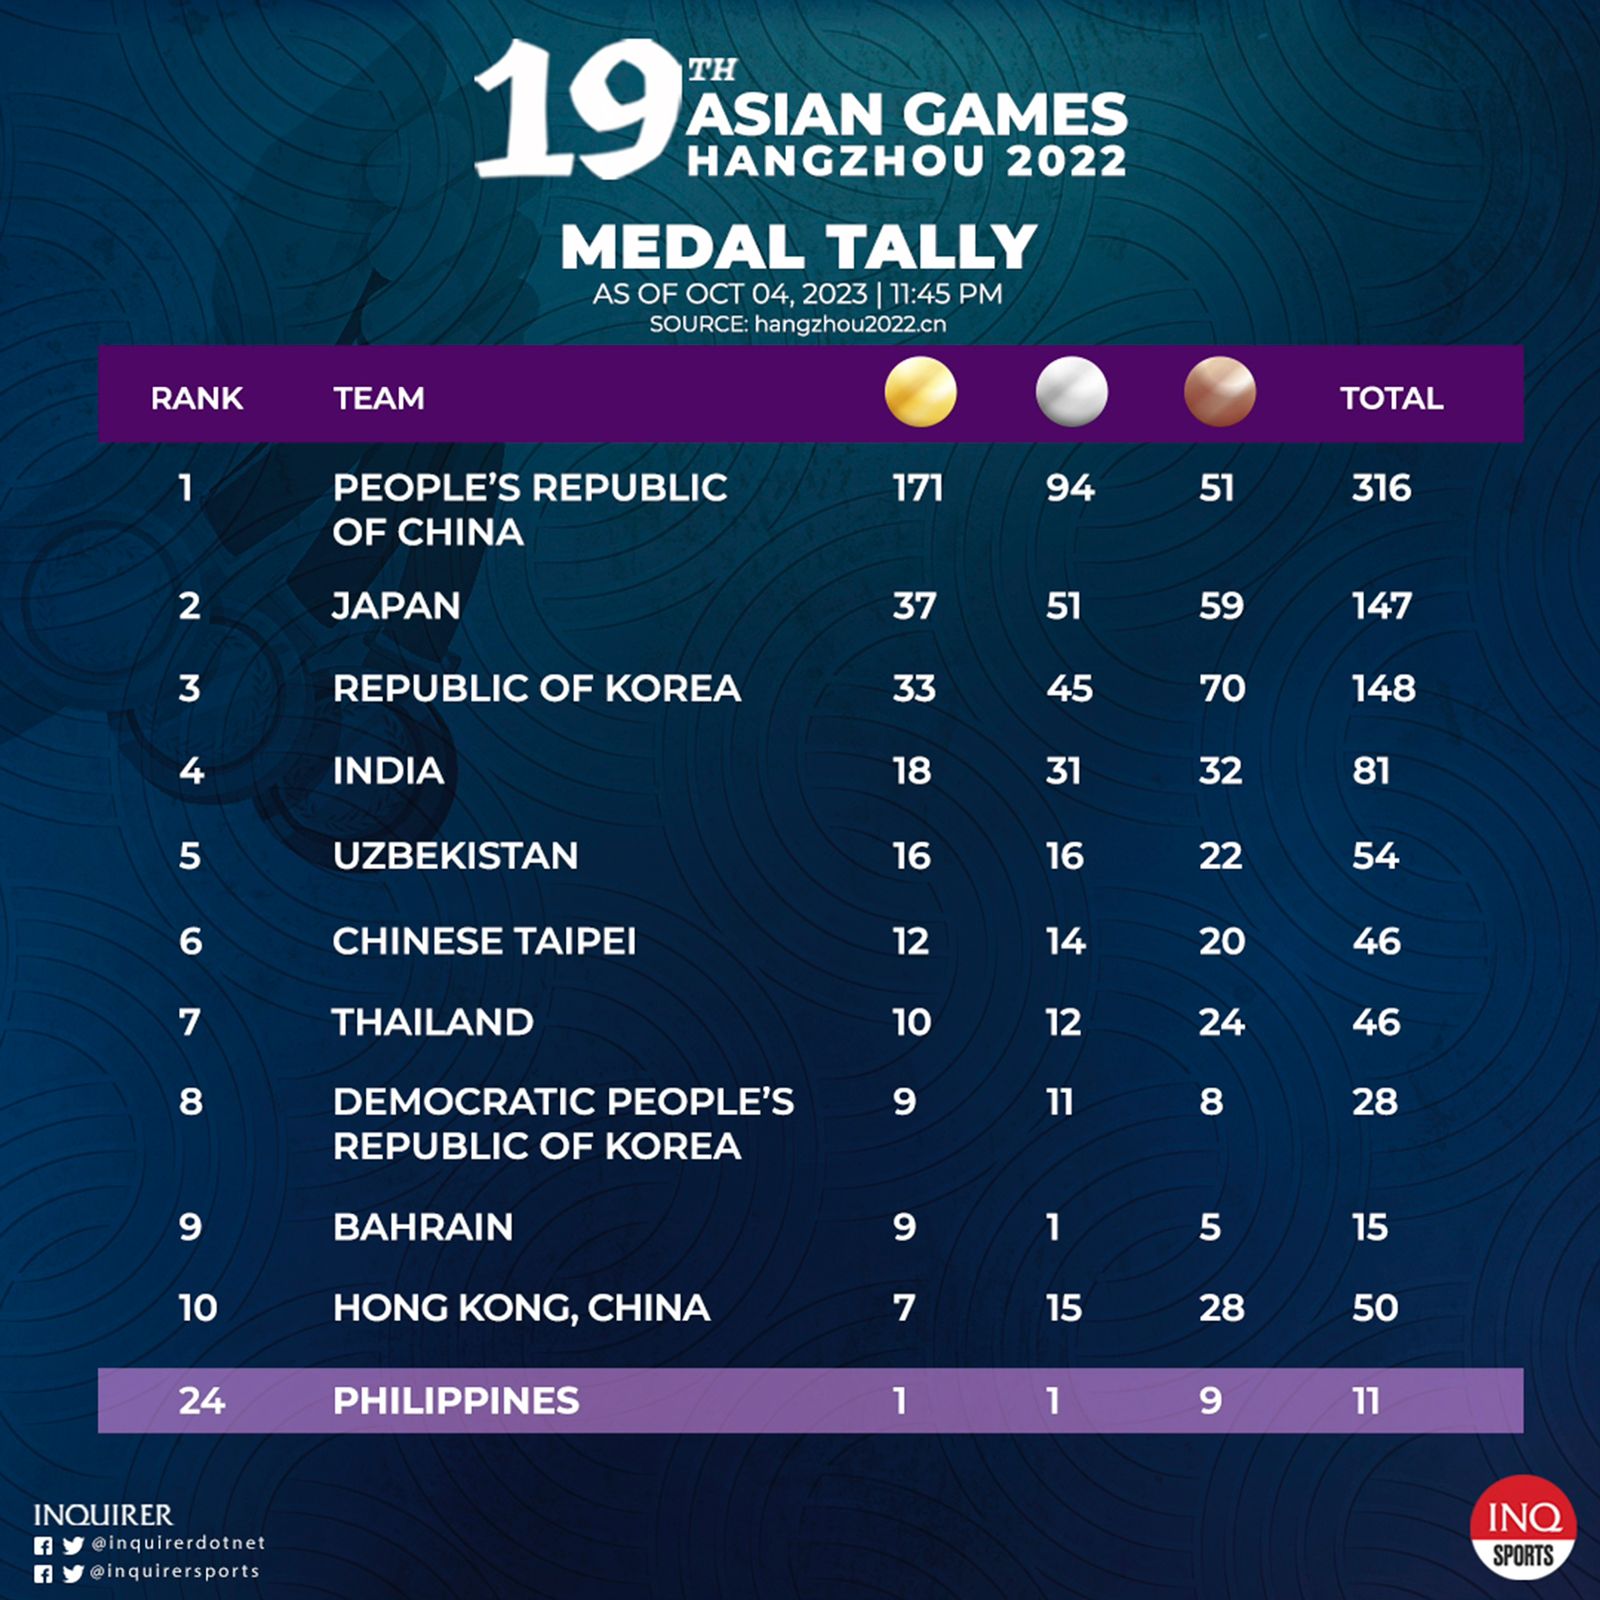 Asian Games medal tally as of October 4, 11:45pm